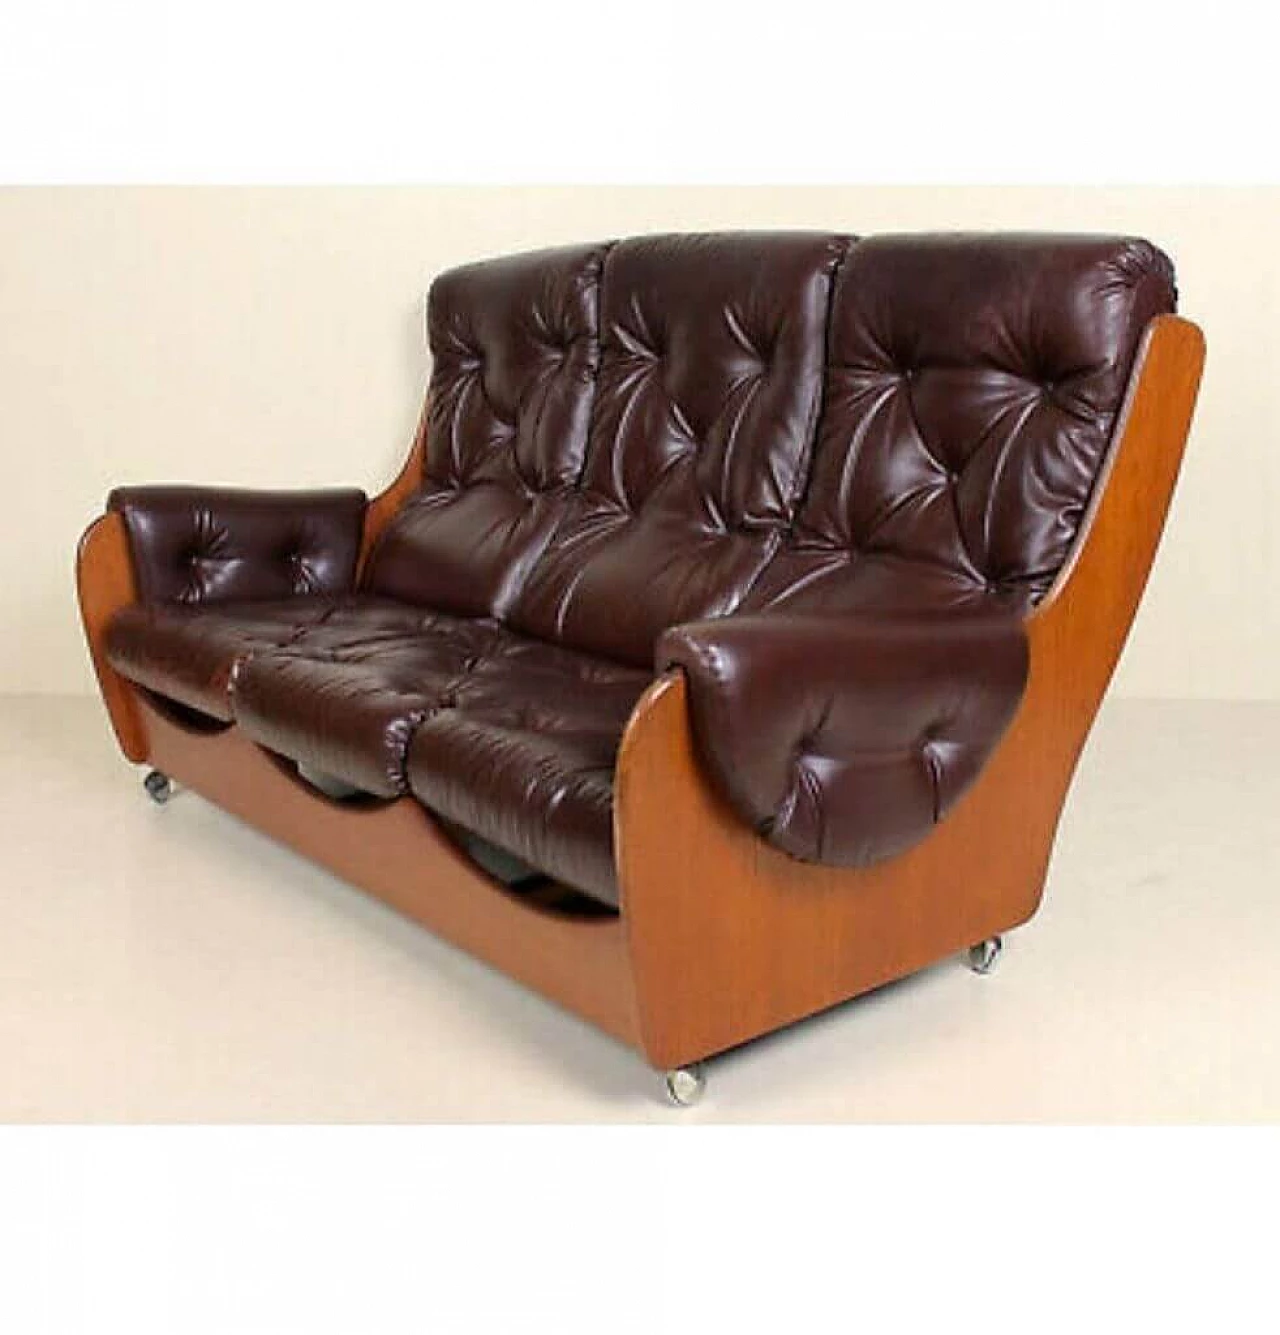 English leather and teak sofa by G. Plan, '70s 1191907